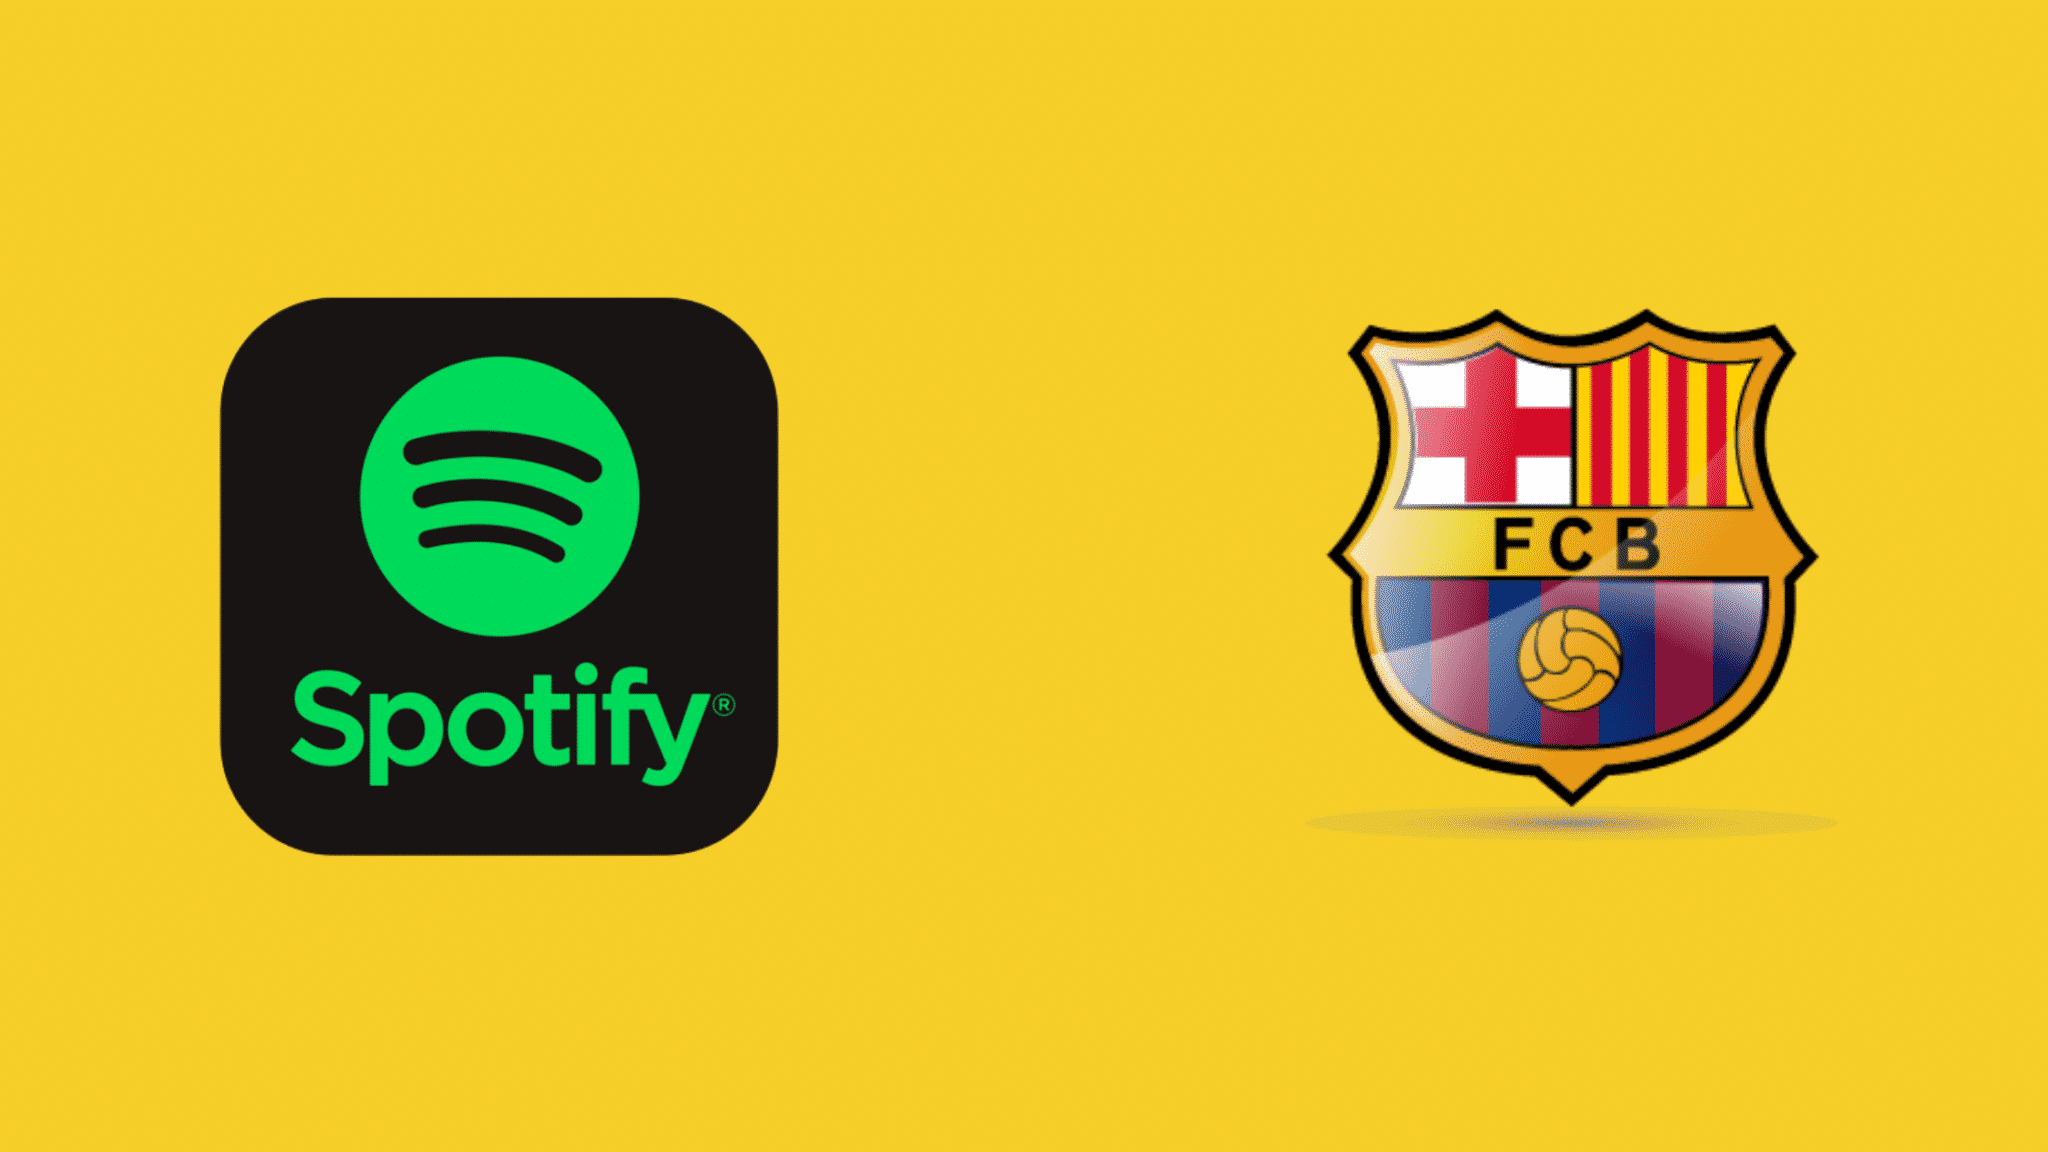 Barcelona Club Members Agree on Final Details of Spotify Partnership, My Football Facts